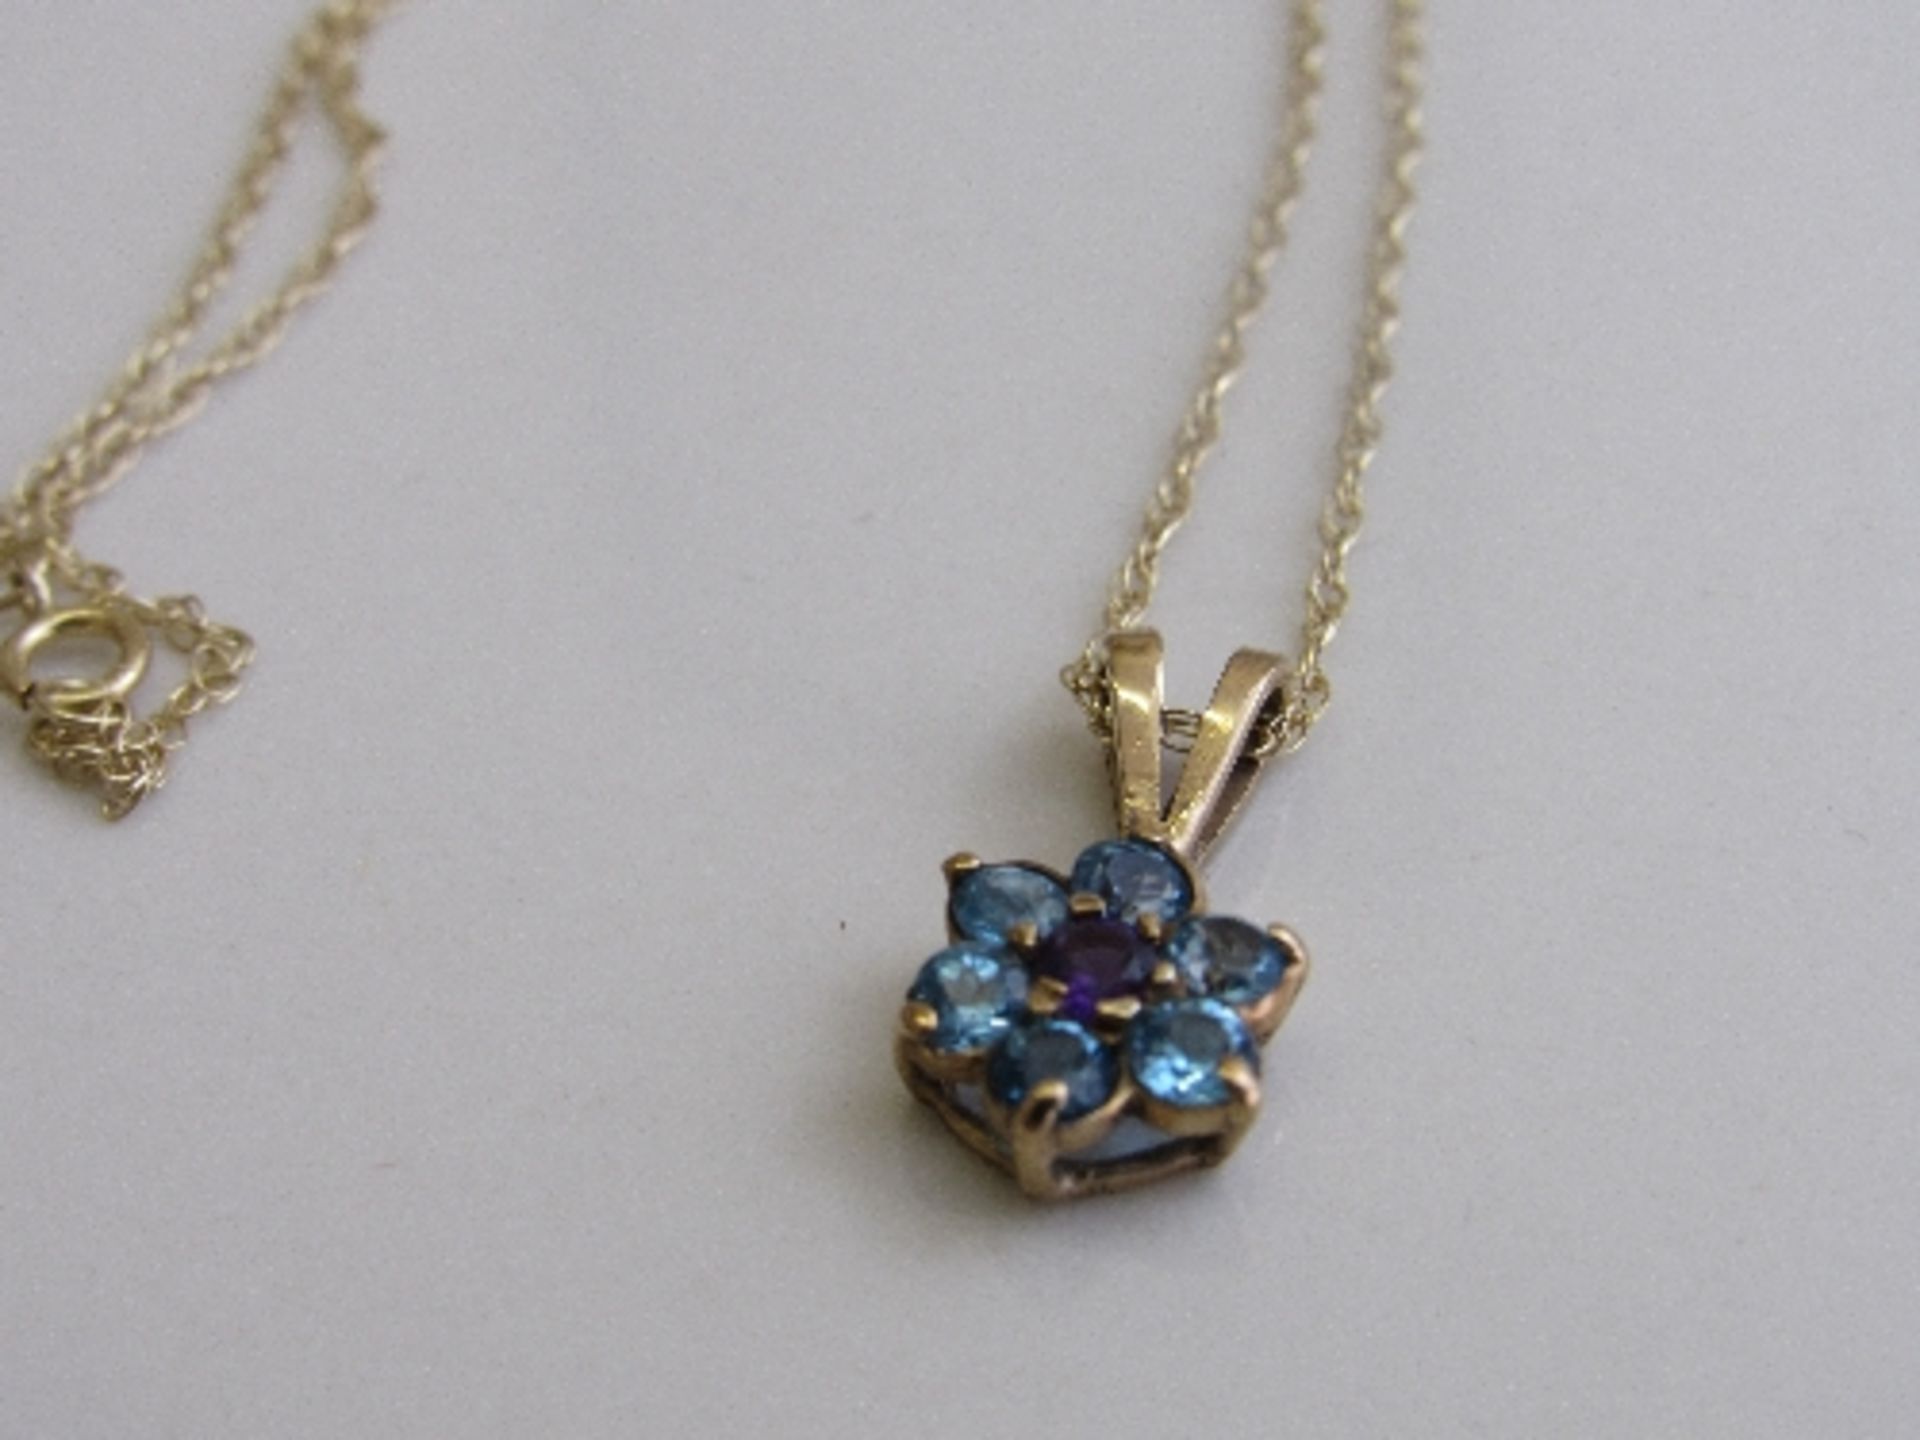 9ct gold, purple & pale blue stone flower pendant on 9ct gold chain, weight 1.9gms. Estimate £20-30 - Image 2 of 4